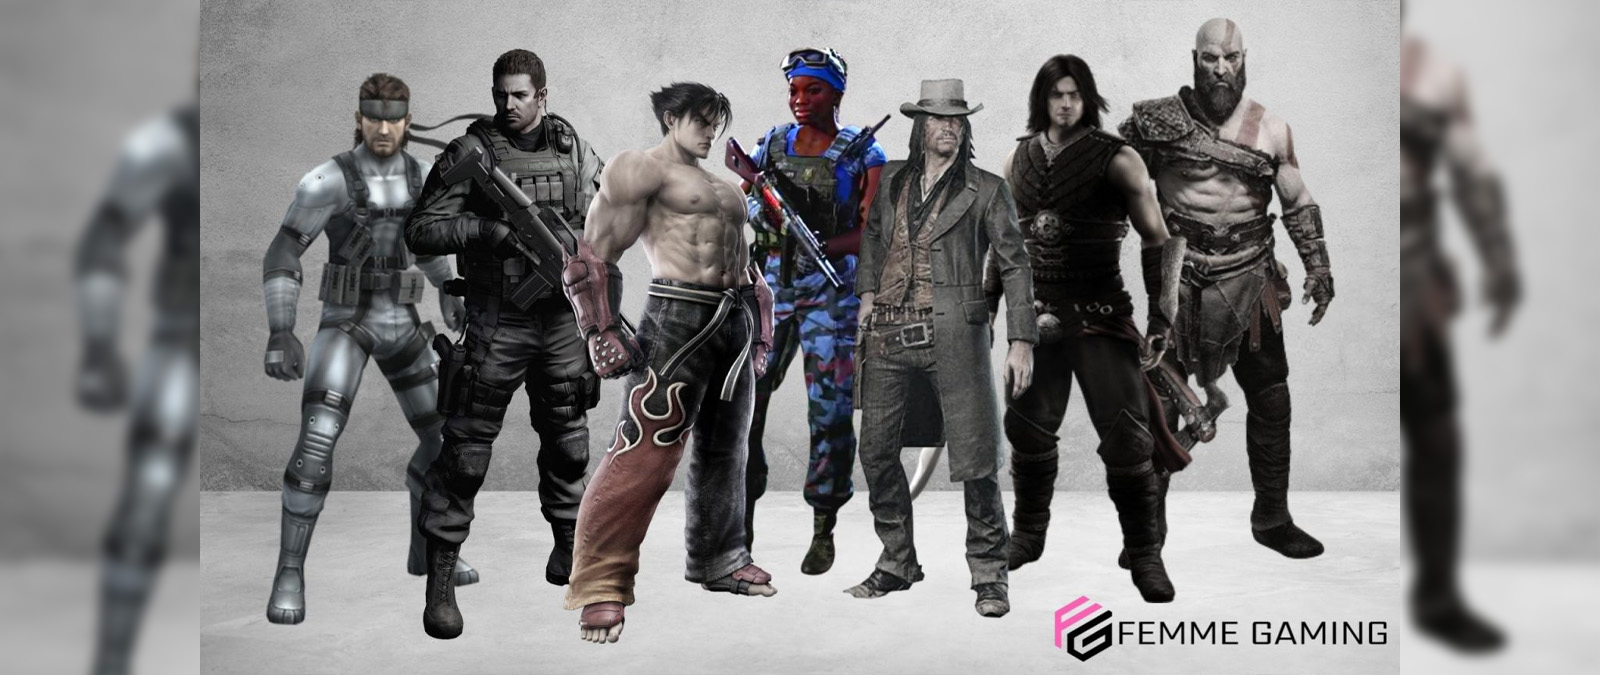 A lockup of iconic male gaming characters, flanking a single female gaming character